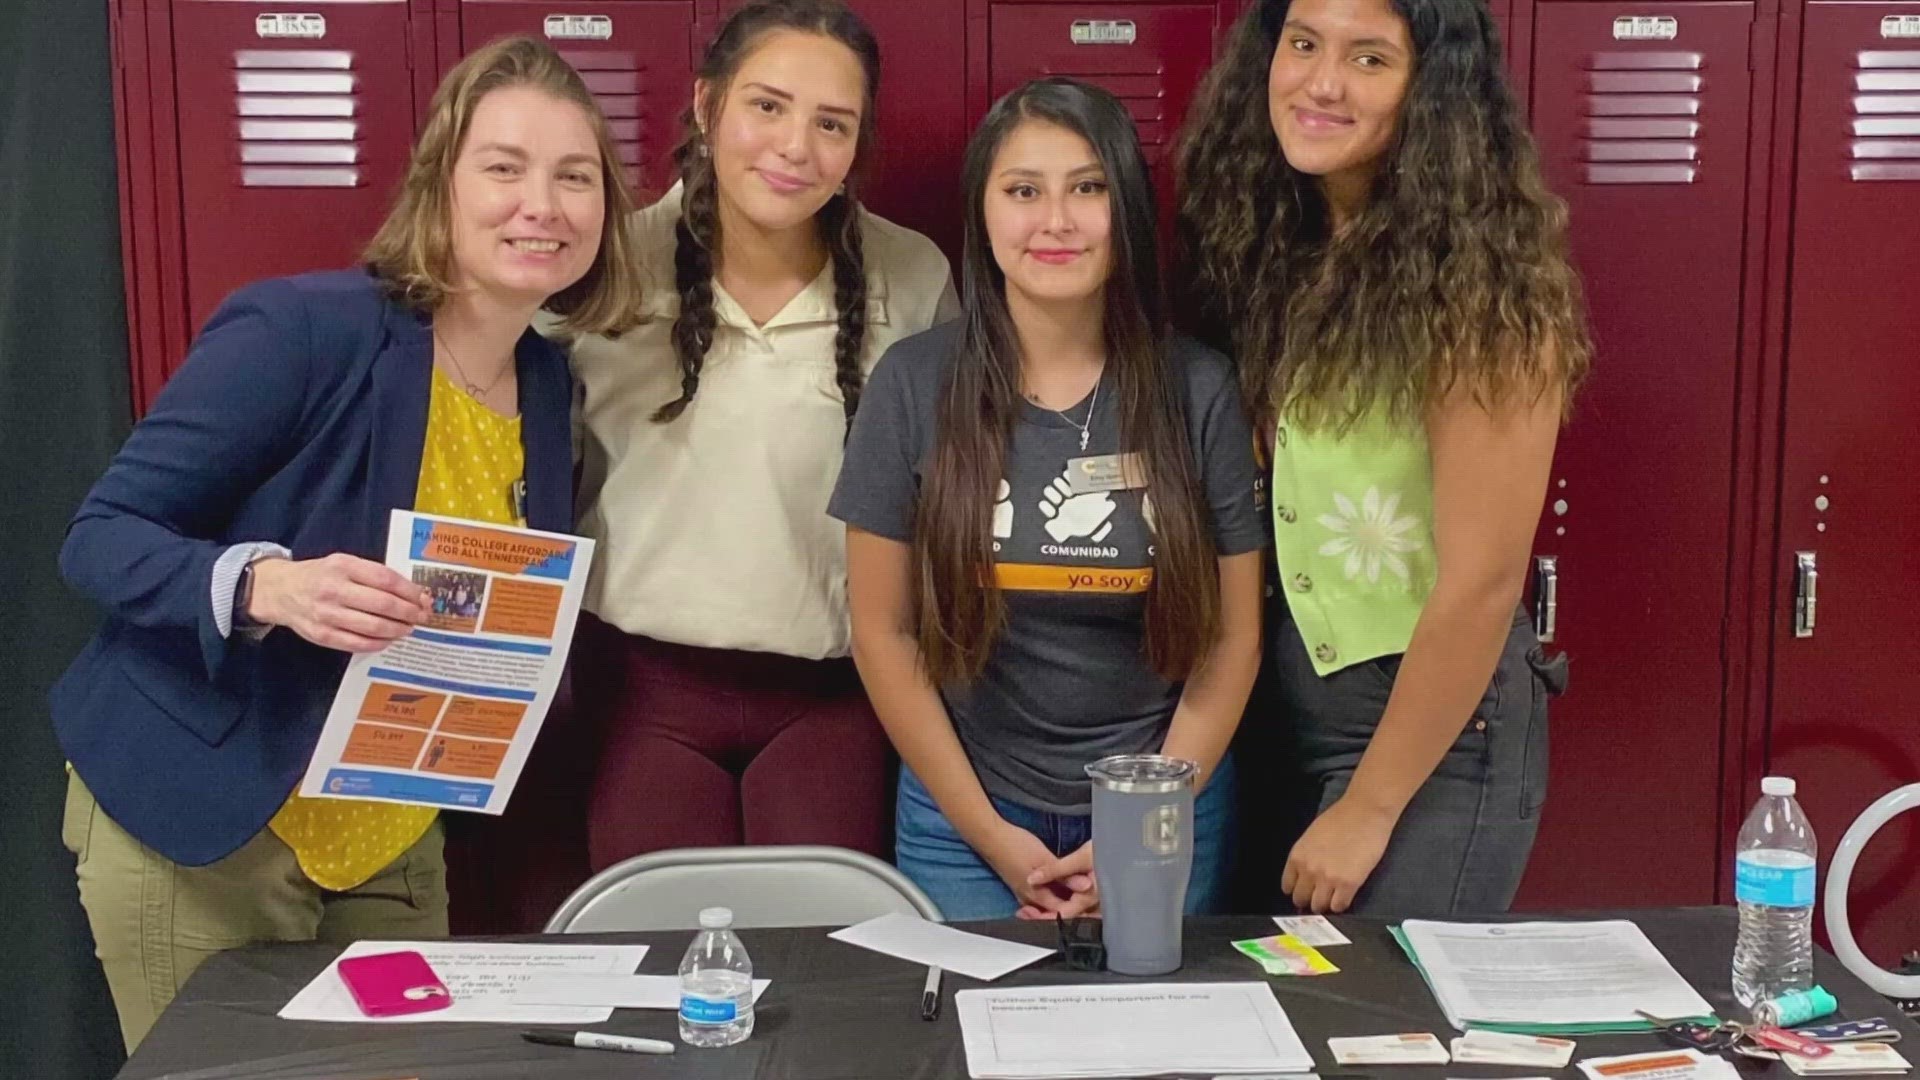 A group of women started a movement, "Semillas of Equity", to bring attention to the lack of access to in-state tuition for undocumented students.